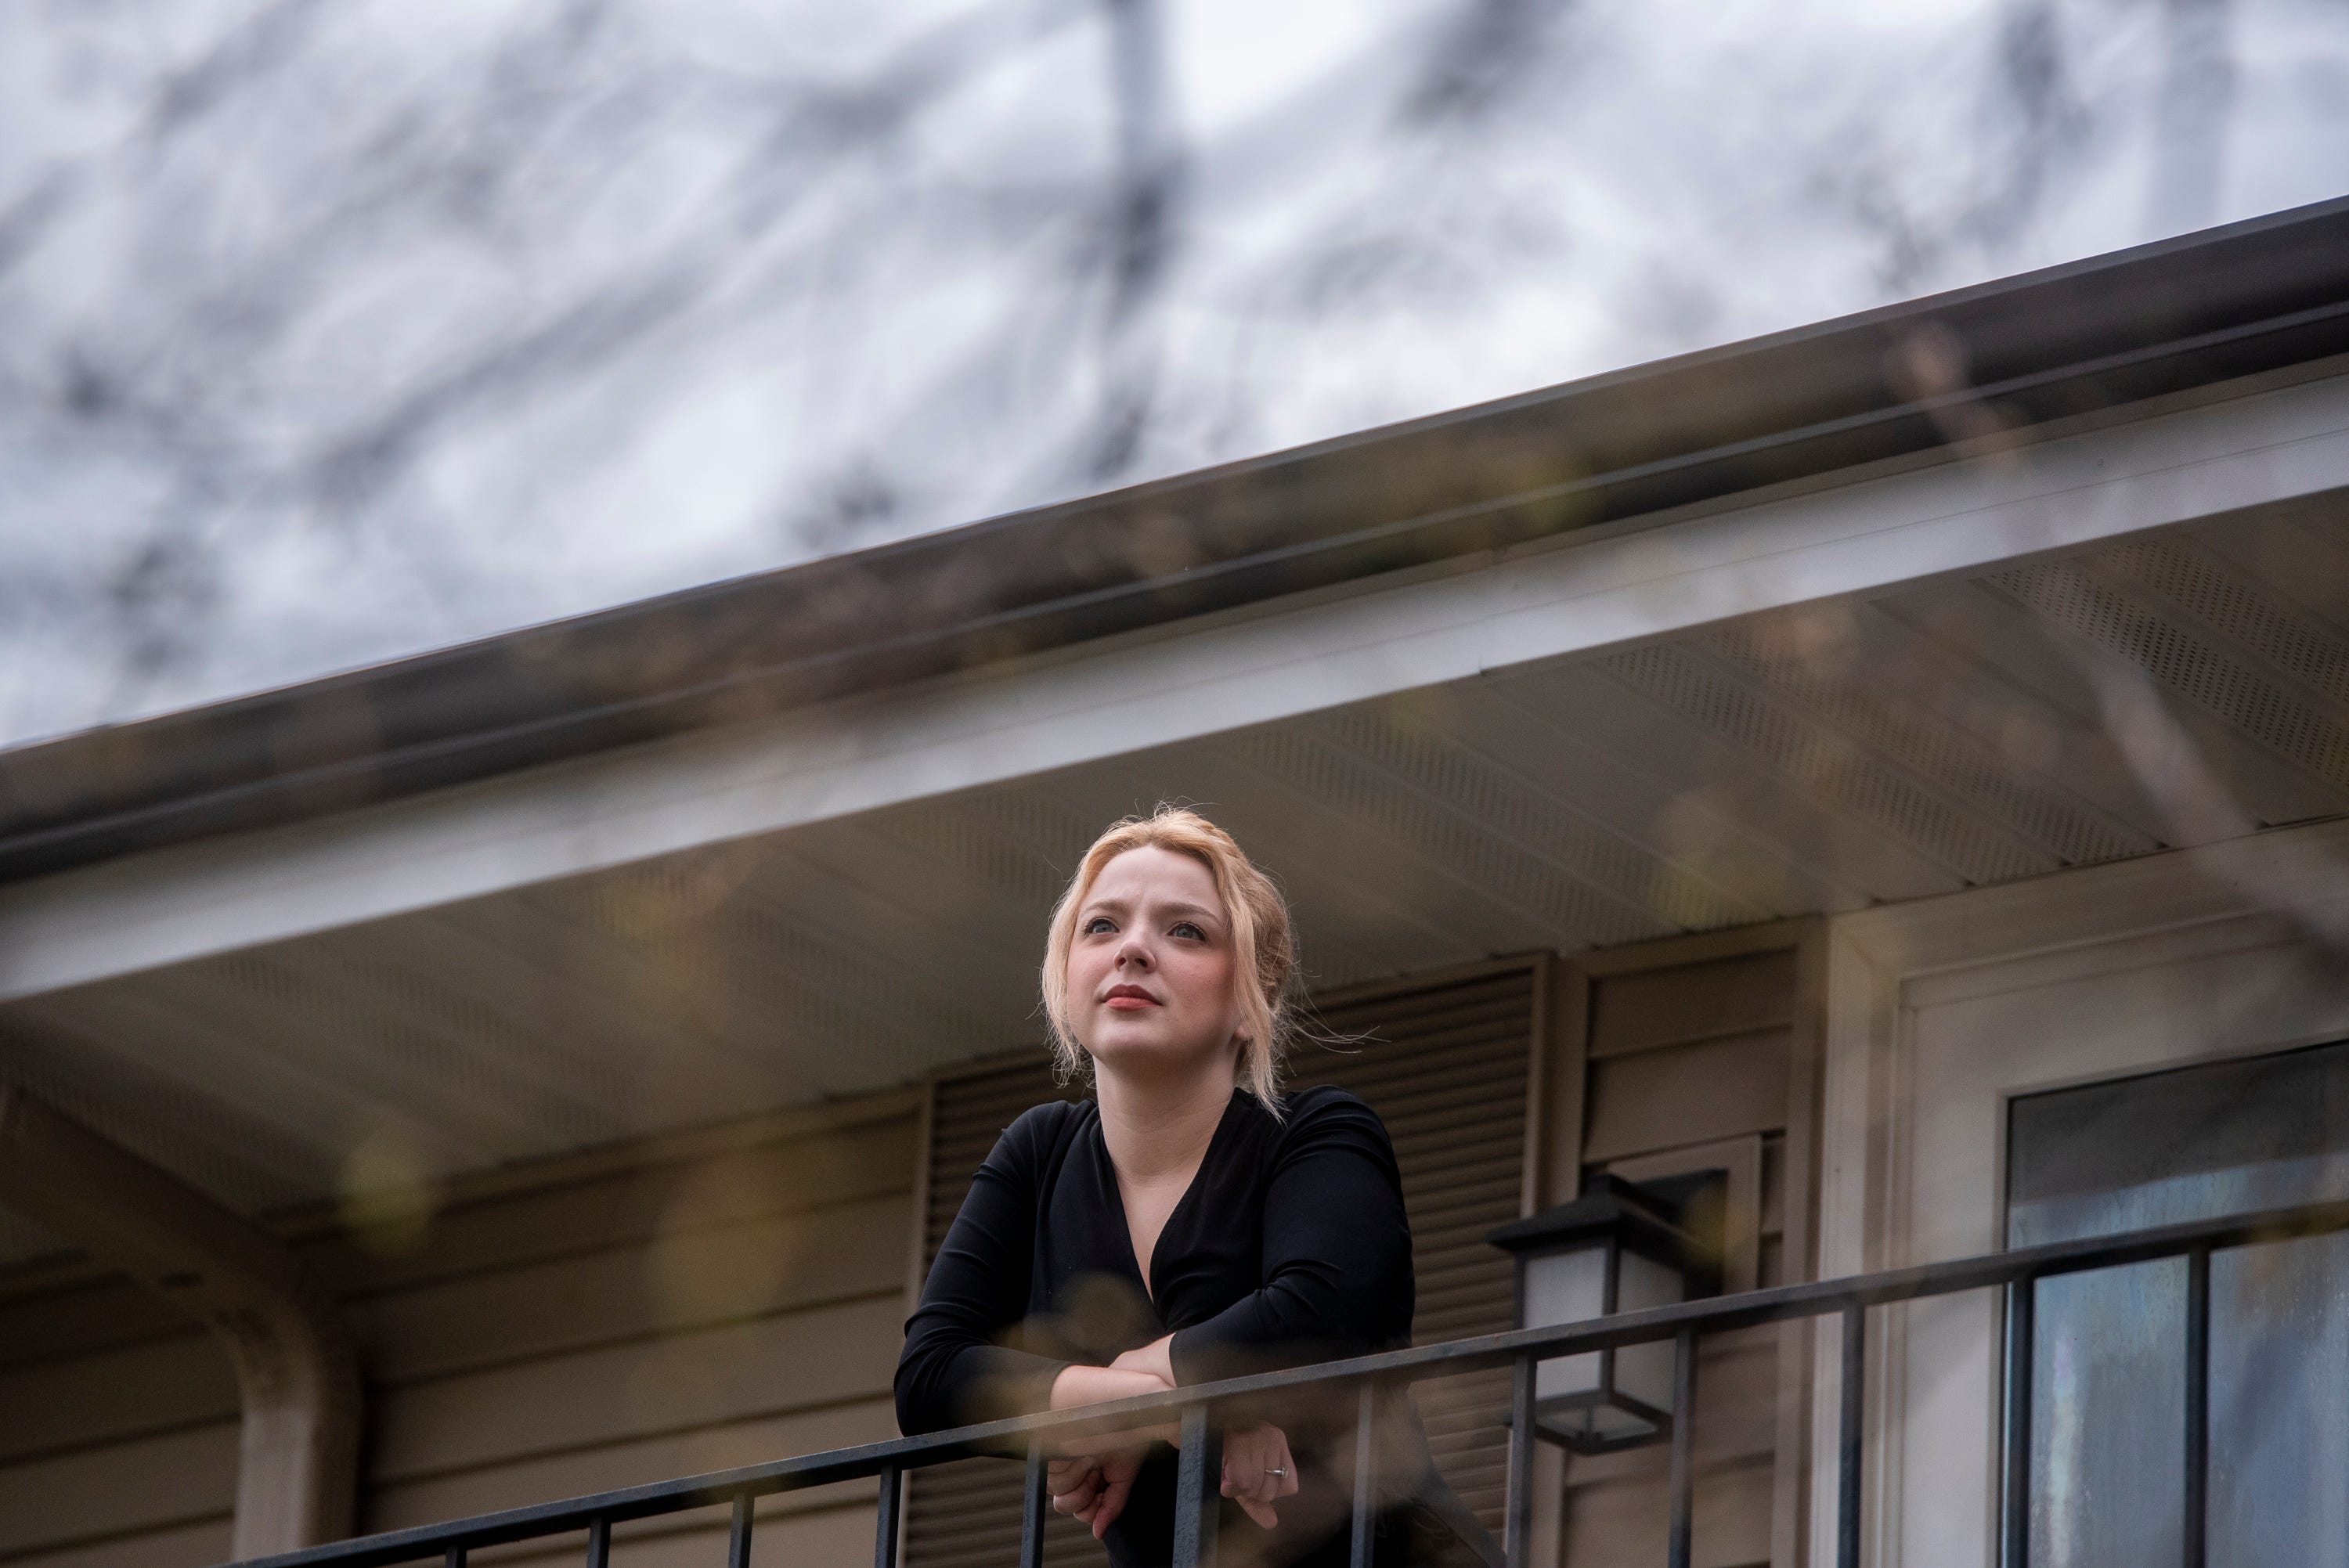 Rachel Metcalfe, 22, poses on her balcony in Naperville, Illinois, on Friday, May 1, 2020. Metcalfe went from having a full-time job and living comfortably to applying for unemployment and wondering how she was going to pay rent as she recovered from COVID-19.